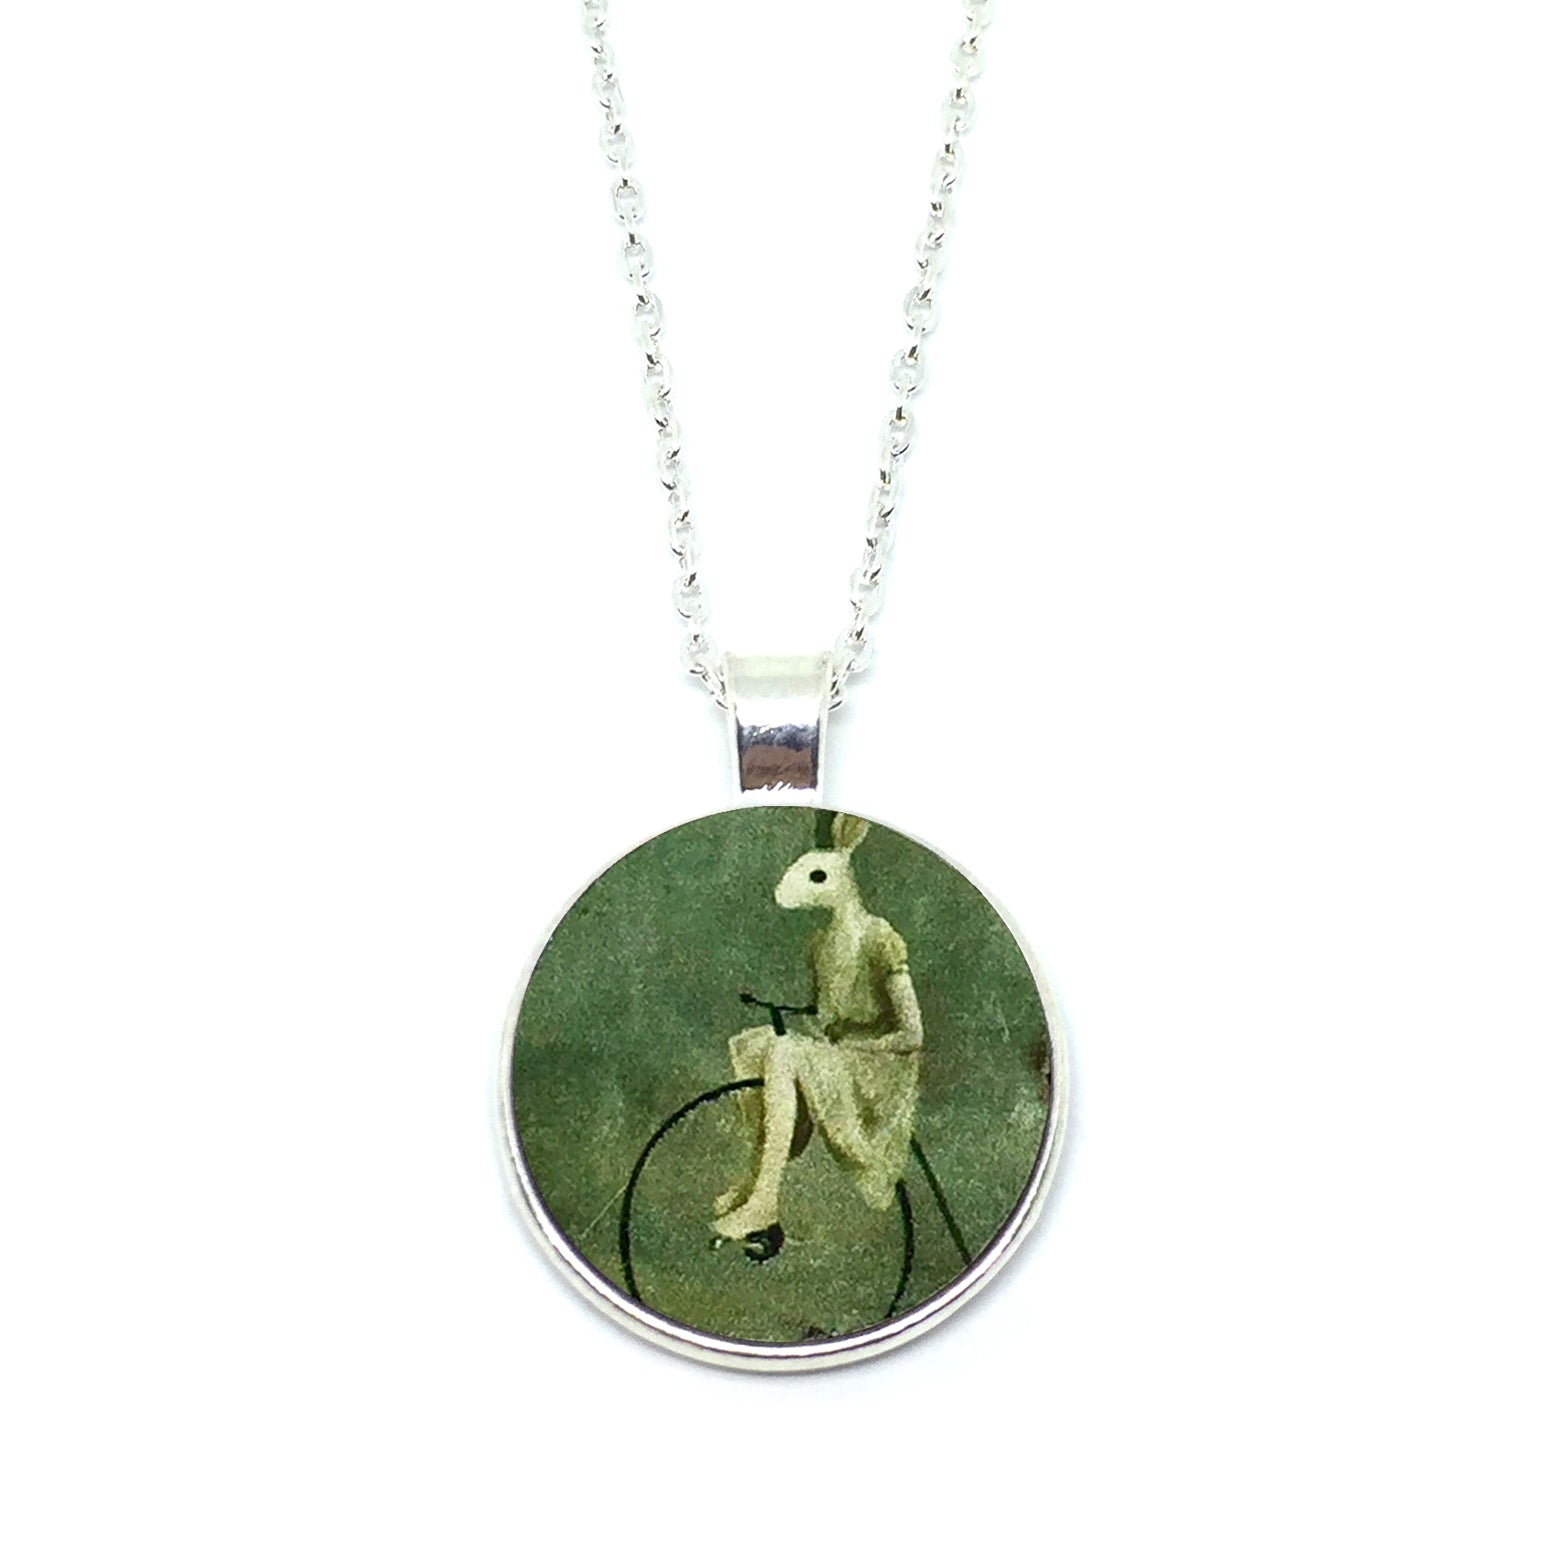 Mythical Rabbitgirl On Wheel Necklace - LM